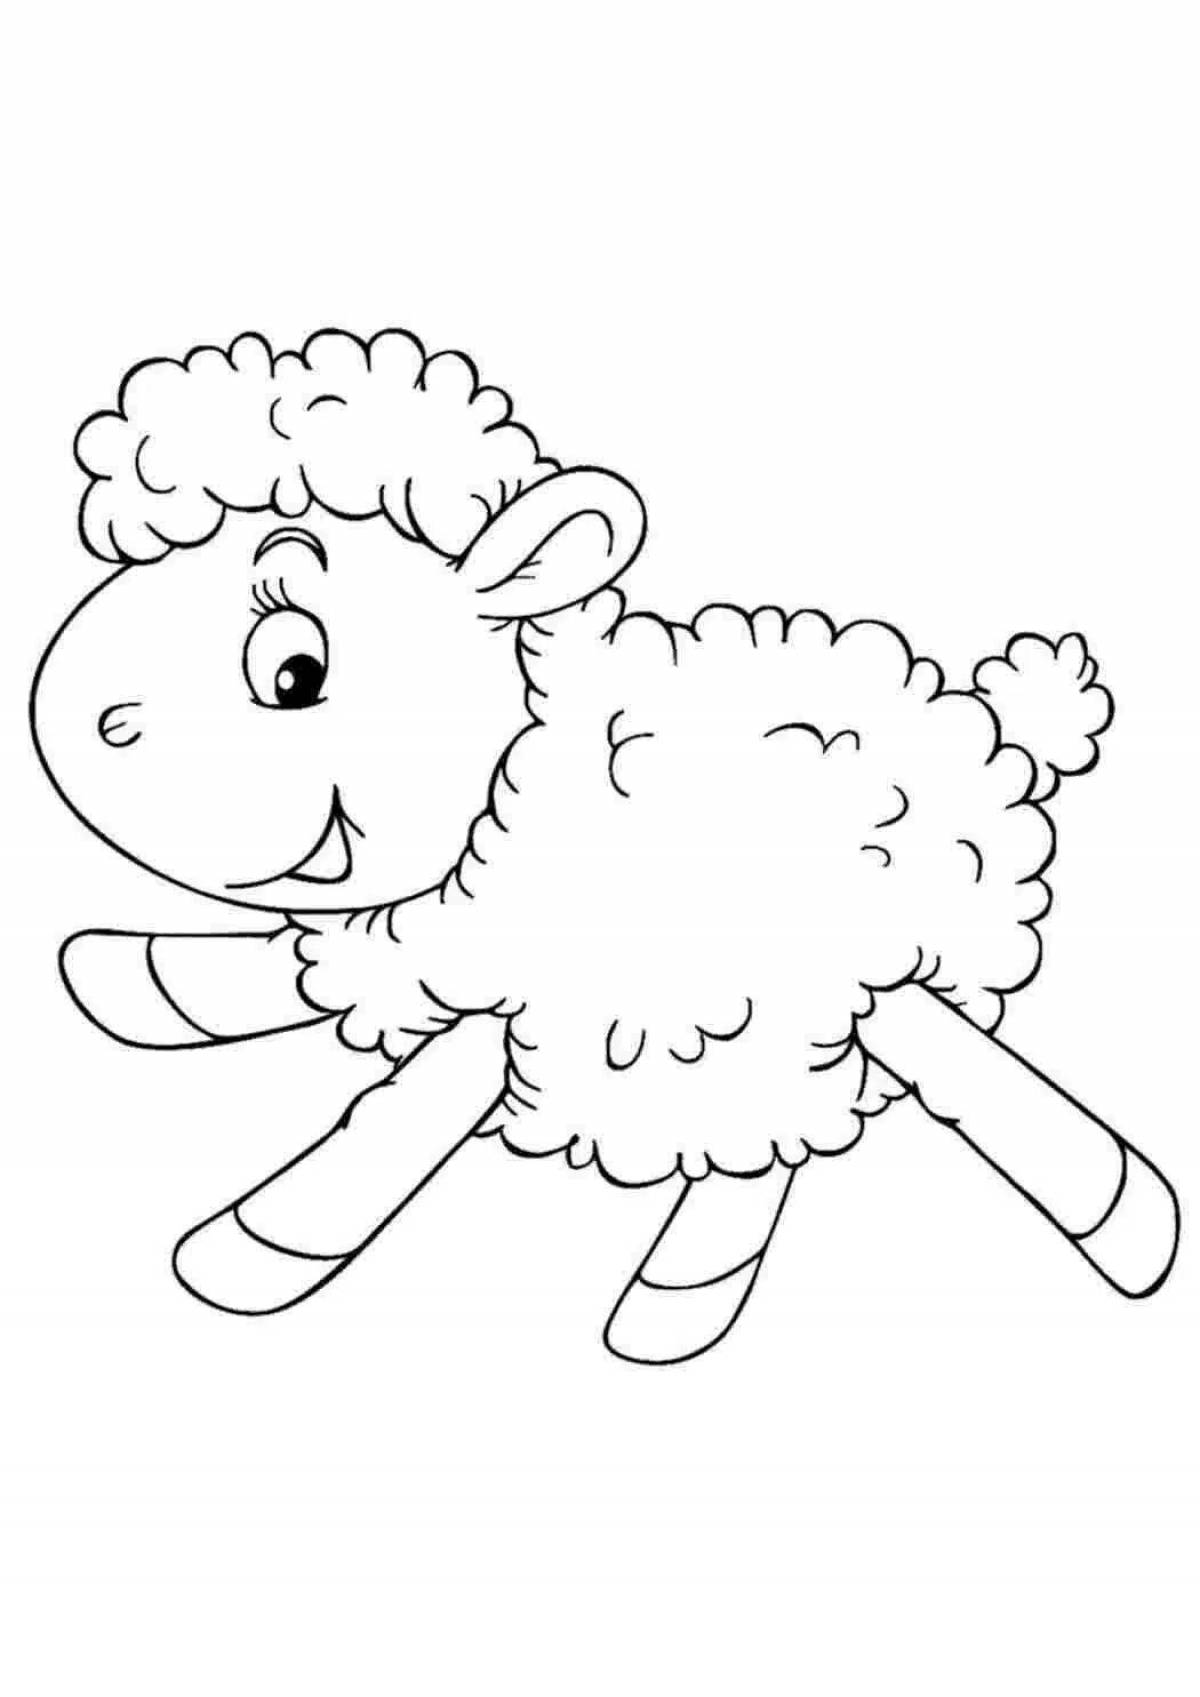 Whimsical lamb coloring book for kids